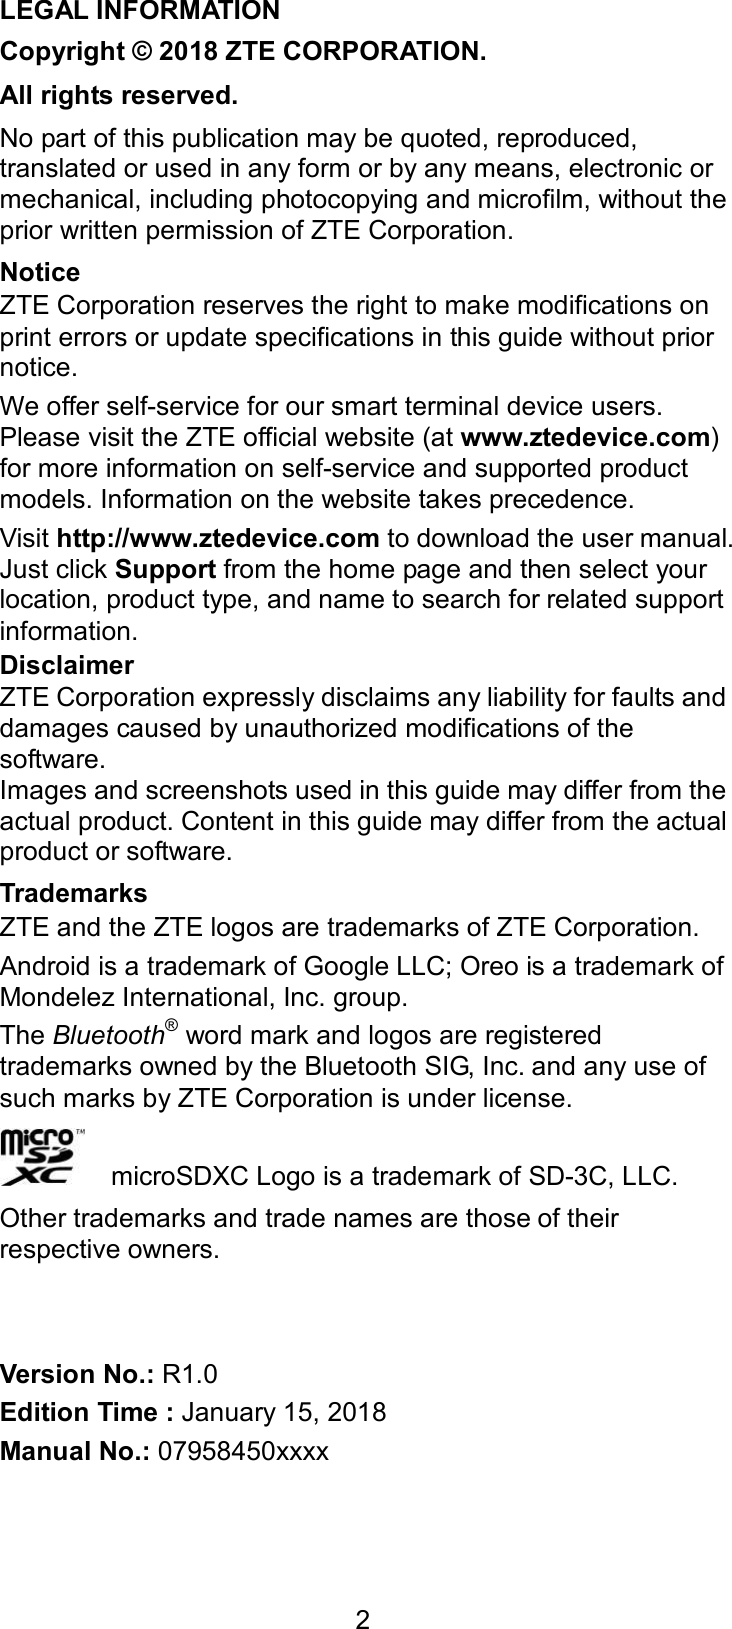  2 LEGAL INFORMATION Copyright © 2018 ZTE CORPORATION. All rights reserved. No part of this publication may be quoted, reproduced, translated or used in any form or by any means, electronic or mechanical, including photocopying and microfilm, without the prior written permission of ZTE Corporation. Notice ZTE Corporation reserves the right to make modifications on print errors or update specifications in this guide without prior notice. We offer self-service for our smart terminal device users. Please visit the ZTE official website (at www.ztedevice.com) for more information on self-service and supported product models. Information on the website takes precedence. Visit http://www.ztedevice.com to download the user manual. Just click Support from the home page and then select your location, product type, and name to search for related support information. Disclaimer ZTE Corporation expressly disclaims any liability for faults and damages caused by unauthorized modifications of the software. Images and screenshots used in this guide may differ from the actual product. Content in this guide may differ from the actual product or software. Trademarks ZTE and the ZTE logos are trademarks of ZTE Corporation. Android is a trademark of Google LLC; Oreo is a trademark of Mondelez International, Inc. group. The Bluetooth® word mark and logos are registered trademarks owned by the Bluetooth SIG, Inc. and any use of such marks by ZTE Corporation is under license.       microSDXC Logo is a trademark of SD-3C, LLC. Other trademarks and trade names are those of their respective owners.   Version No.: R1.0 Edition Time : January 15, 2018 Manual No.: 07958450xxxx 